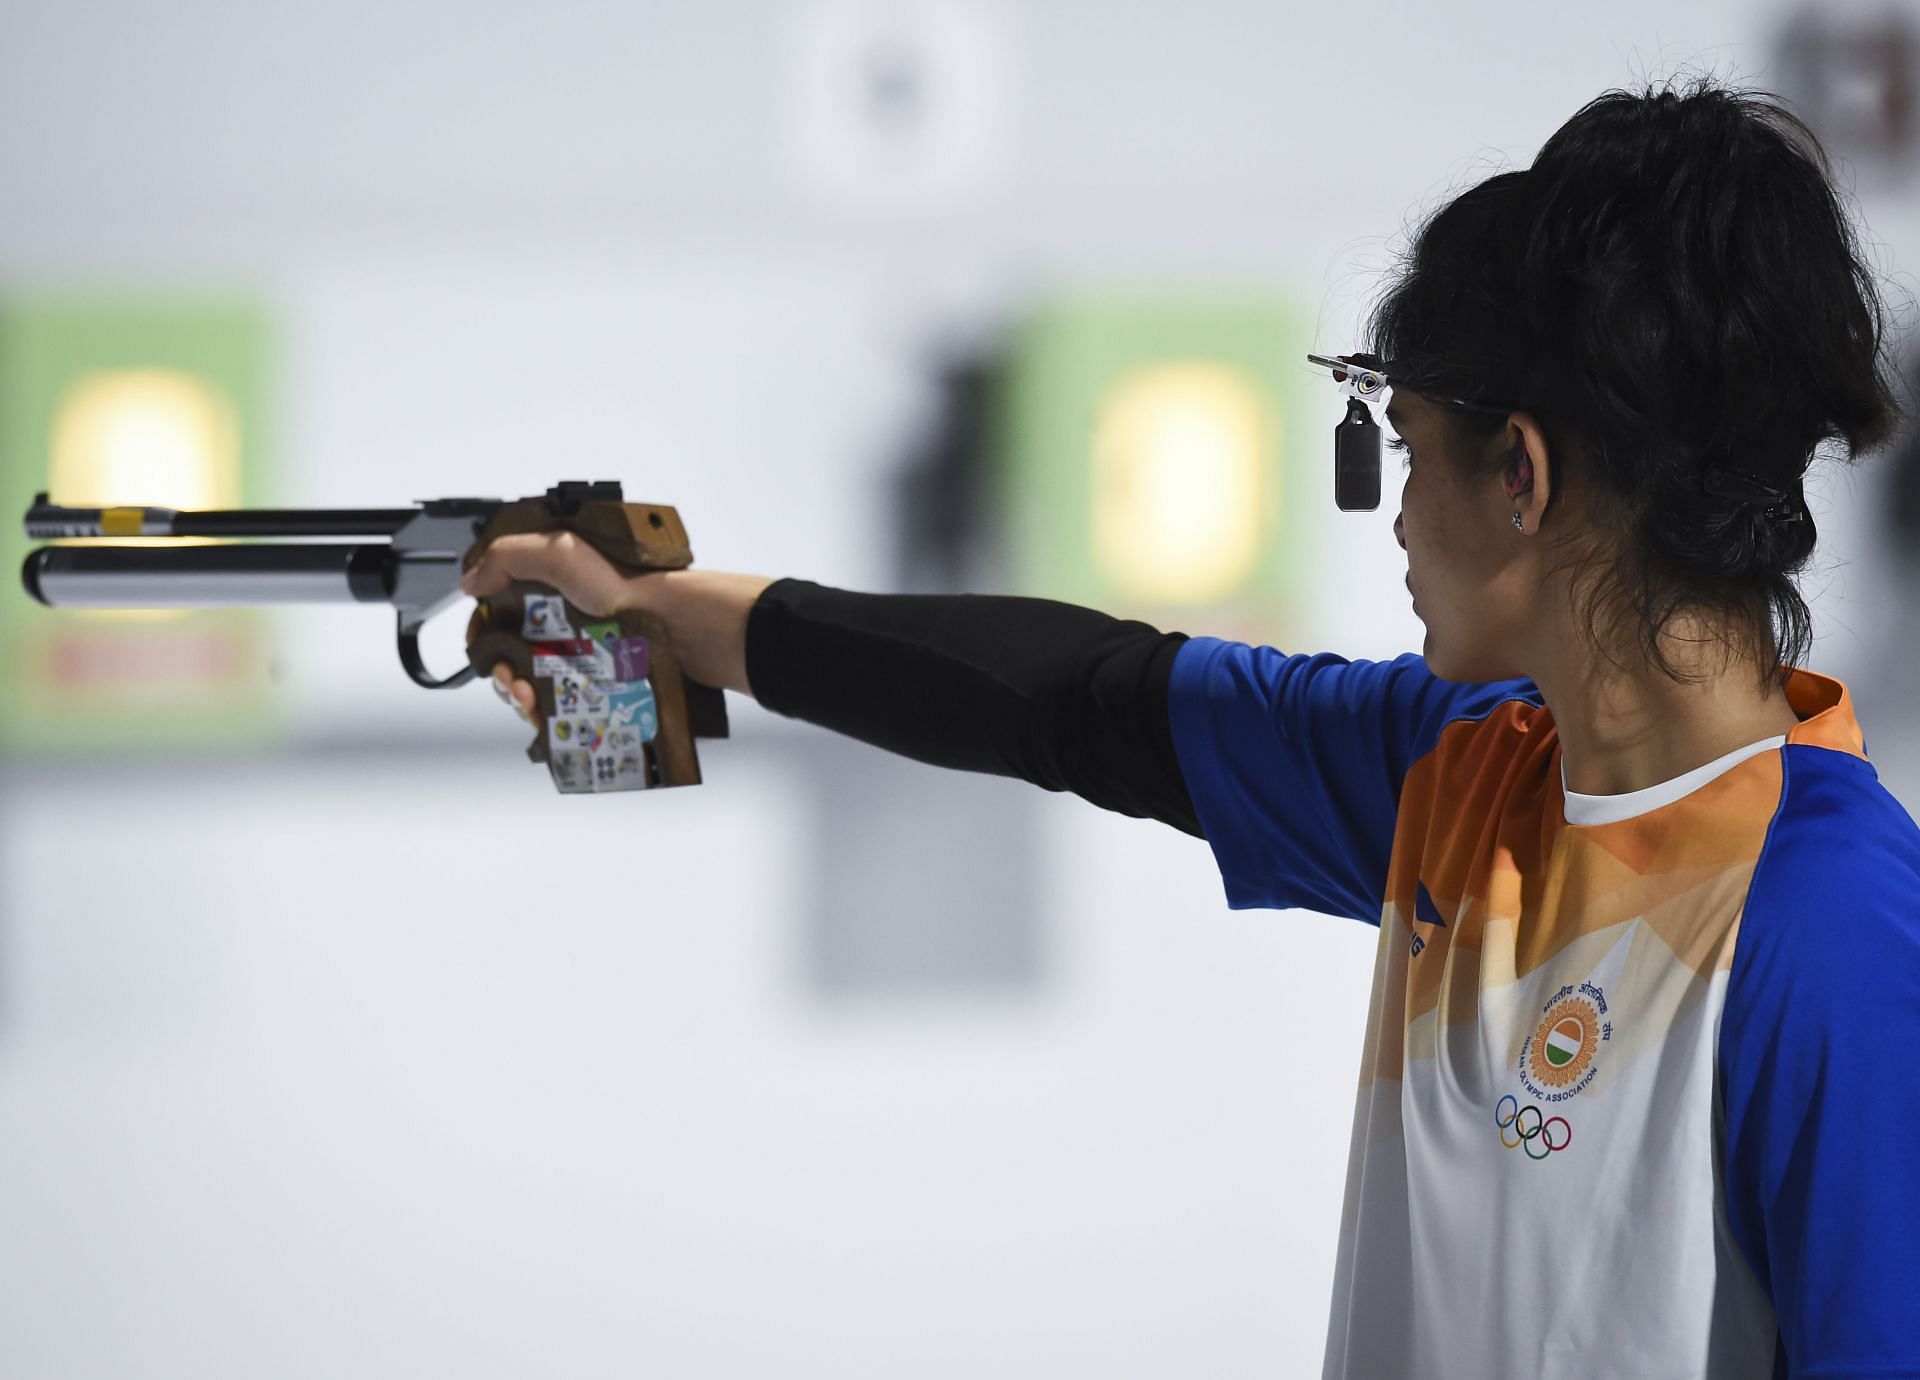 Manu Bhaker in action at the Buenos Aires Youth Olympics (Image courtesy: Getty Images)